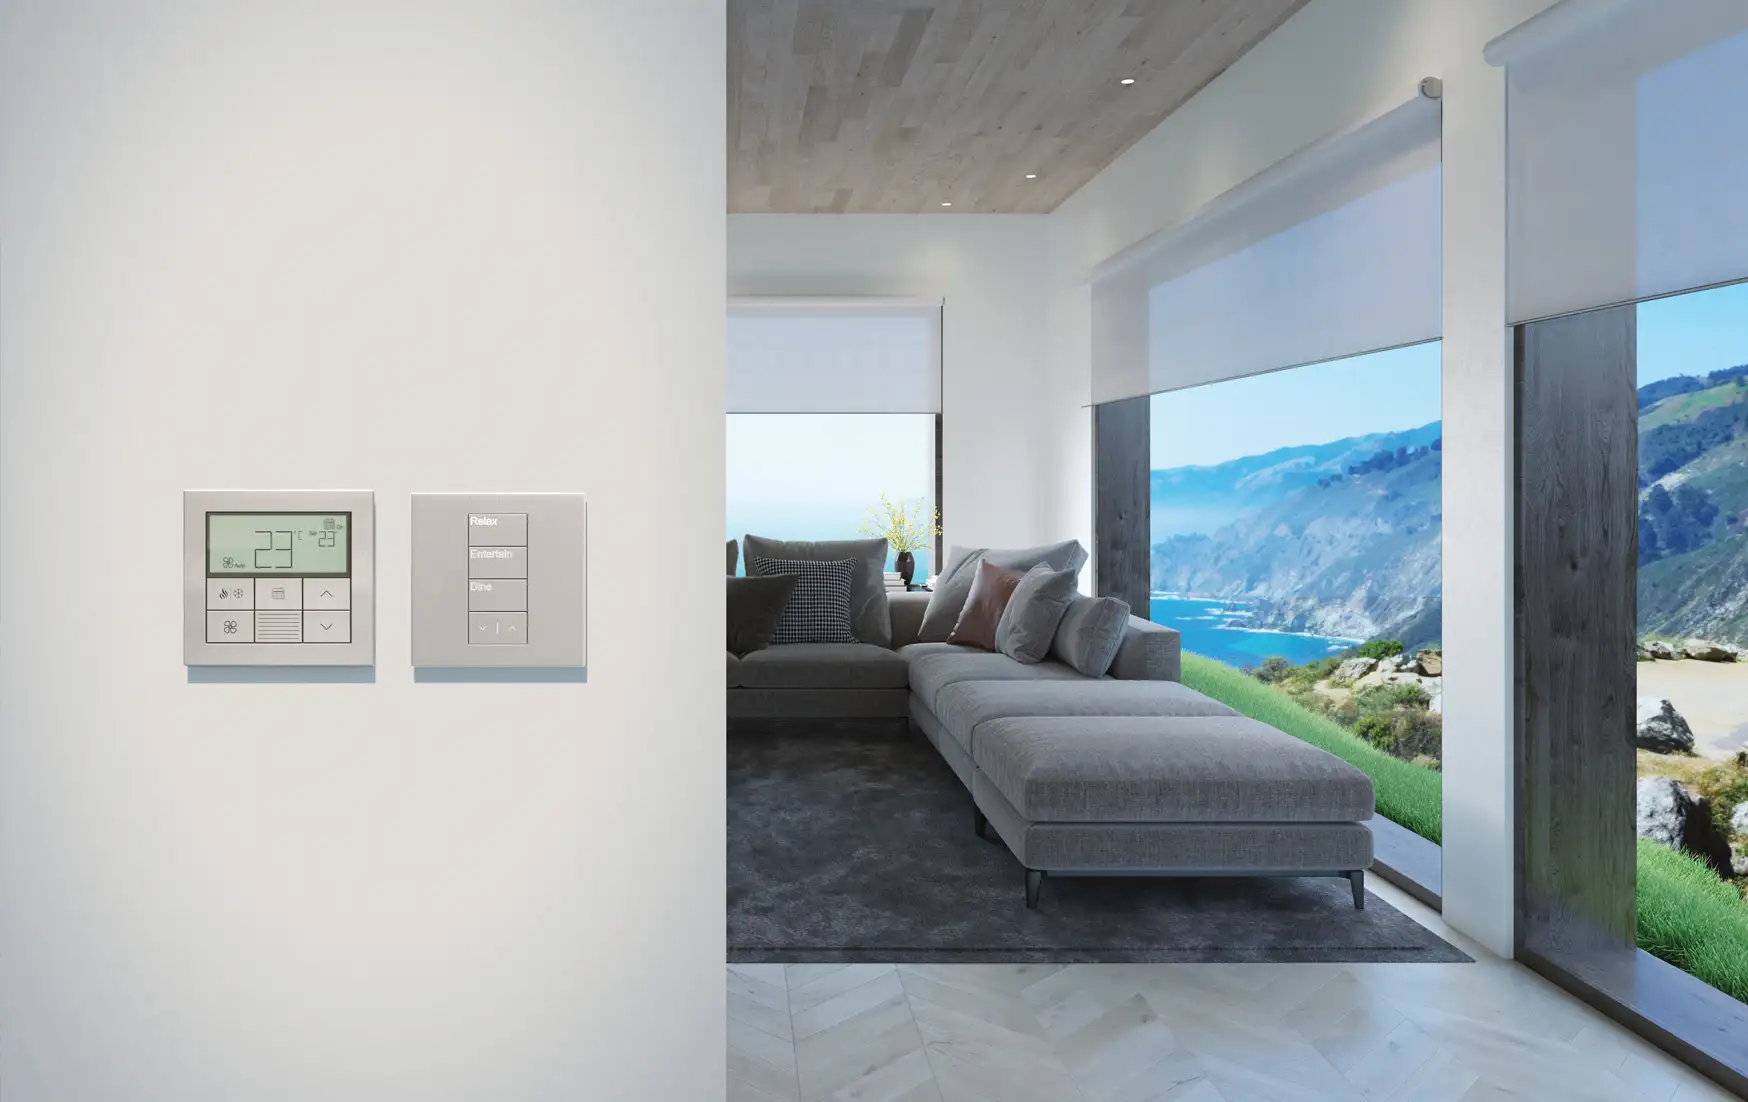 Palladiom keypad and thermostat with  roller shades in background with open fabric to preserve views